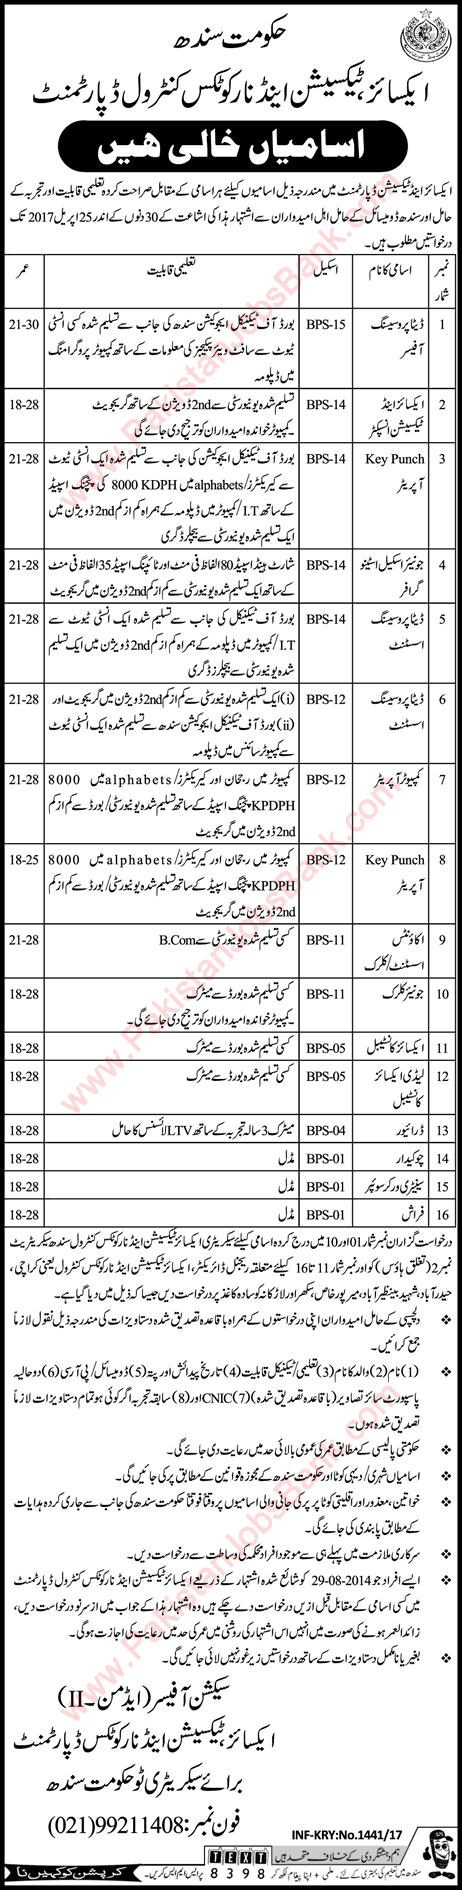 Excise and Taxation Department Sindh Jobs 2017 March Data Processing Assistants, Computer Operator & Others Latest